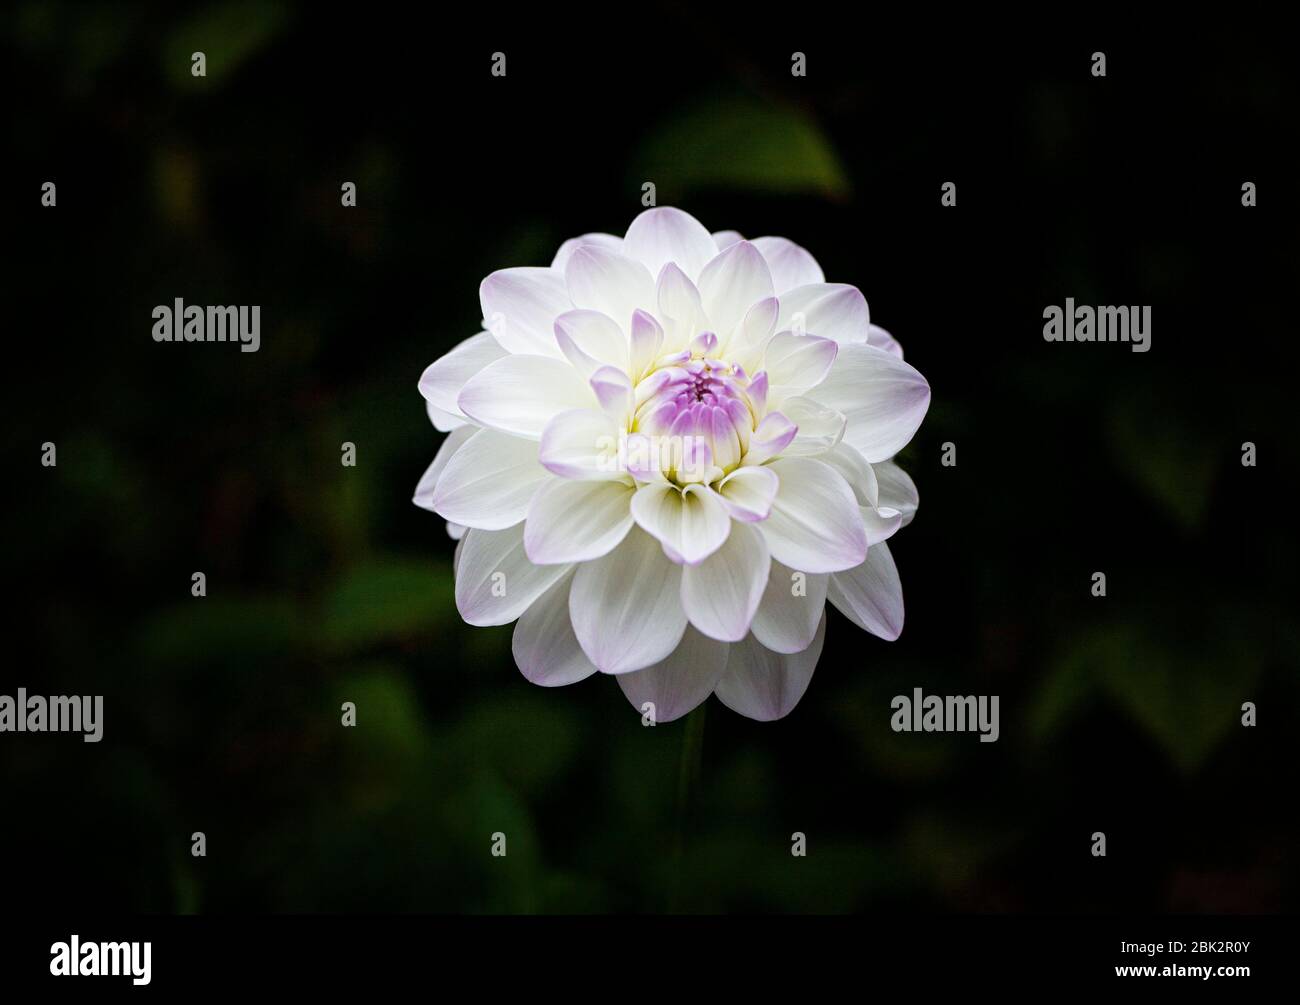 A single dahlia bloom, close up in natural light against blurred green background. Stock Photo